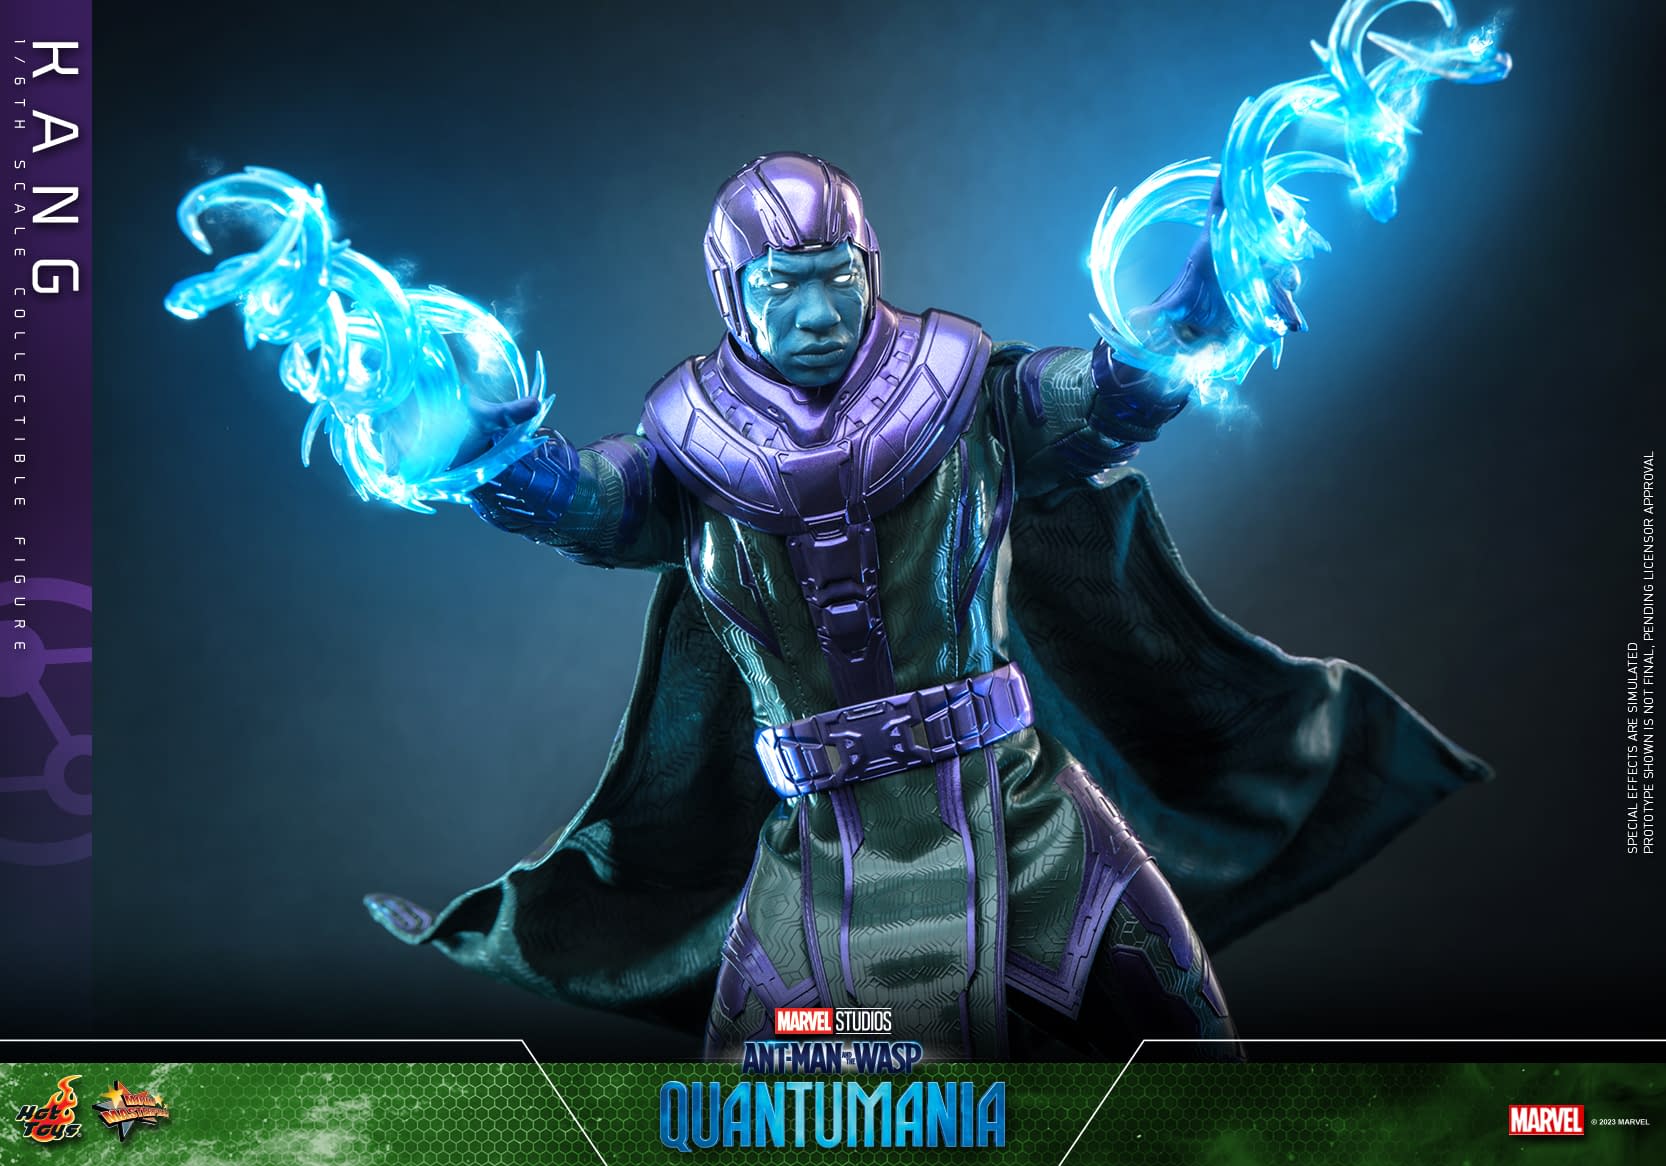 Hot Toys Unleashes Kang the Conqueror with New Quantumania Figure 